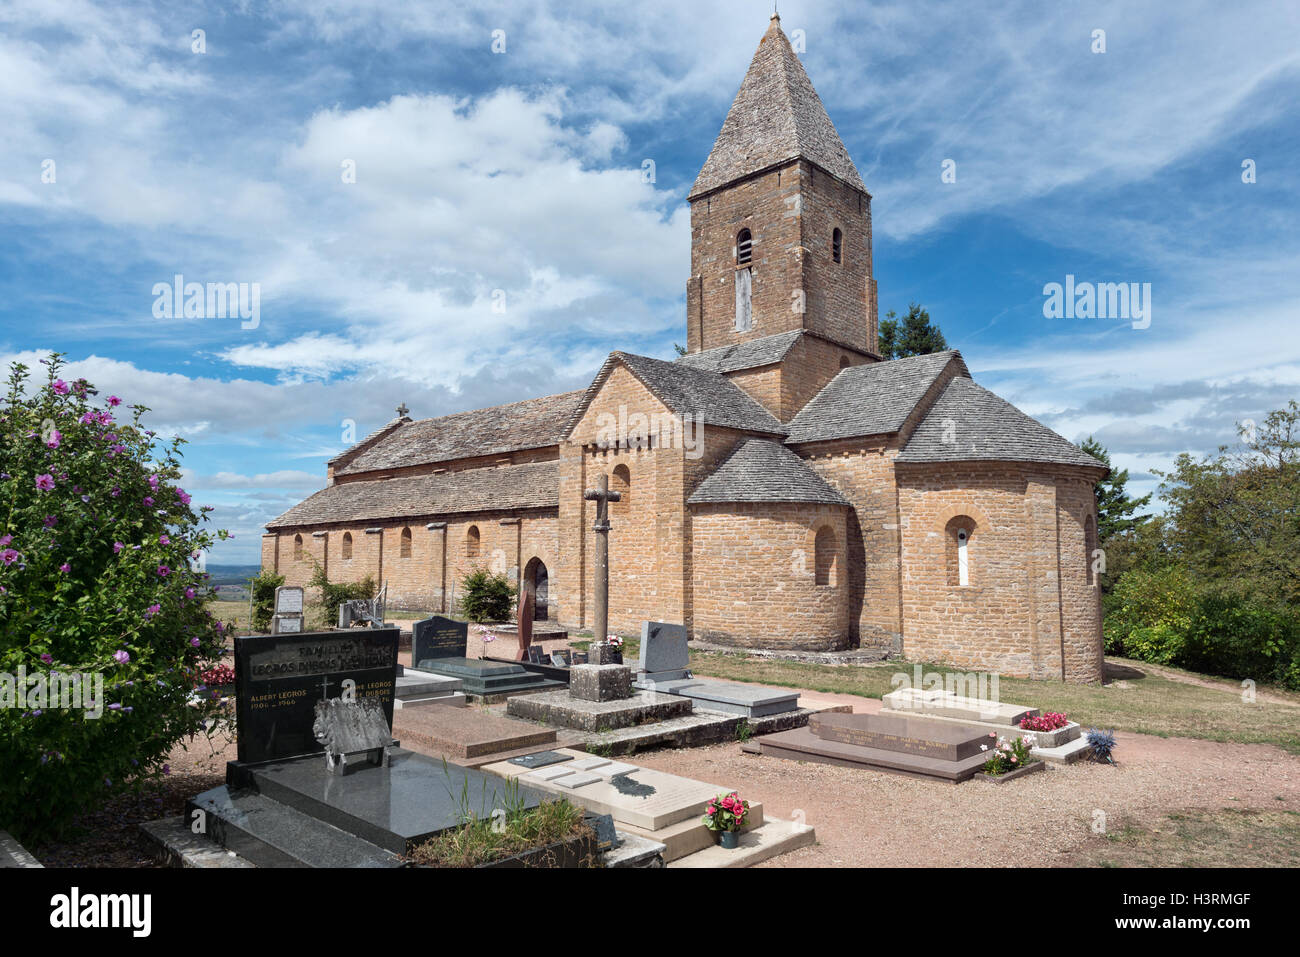 La Chapelle-Sous-Brancion, the church in the of village La Chapelle-Sous-Brancion in Burgundy, France Stock Photo